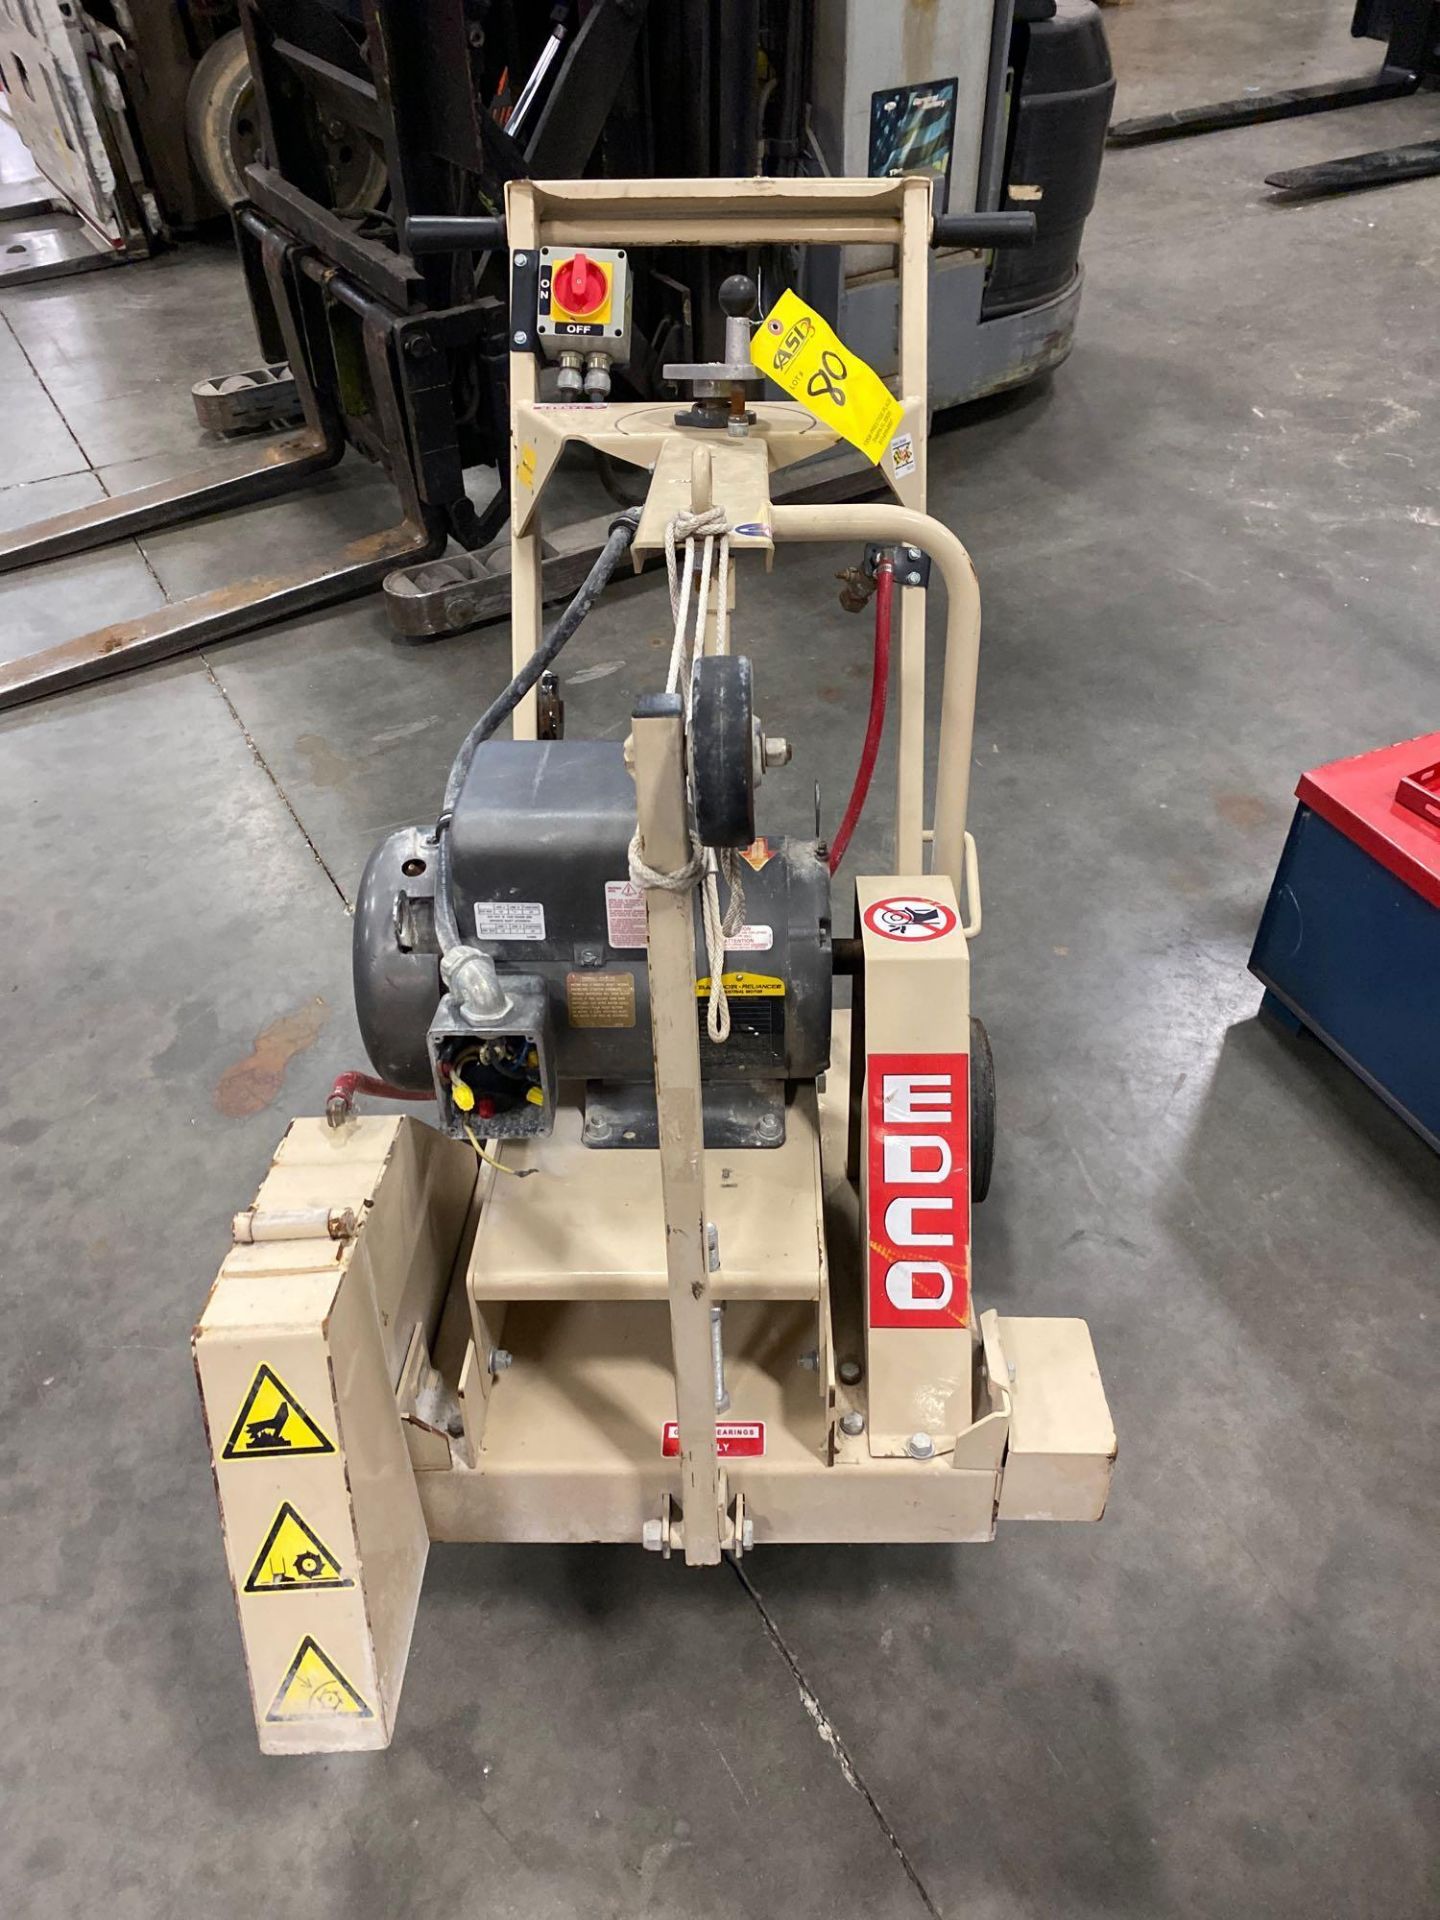 2017 EDCO DS-18-5 WALKBEHIND SAW SUPPORT EQUIPMENT - Image 16 of 20